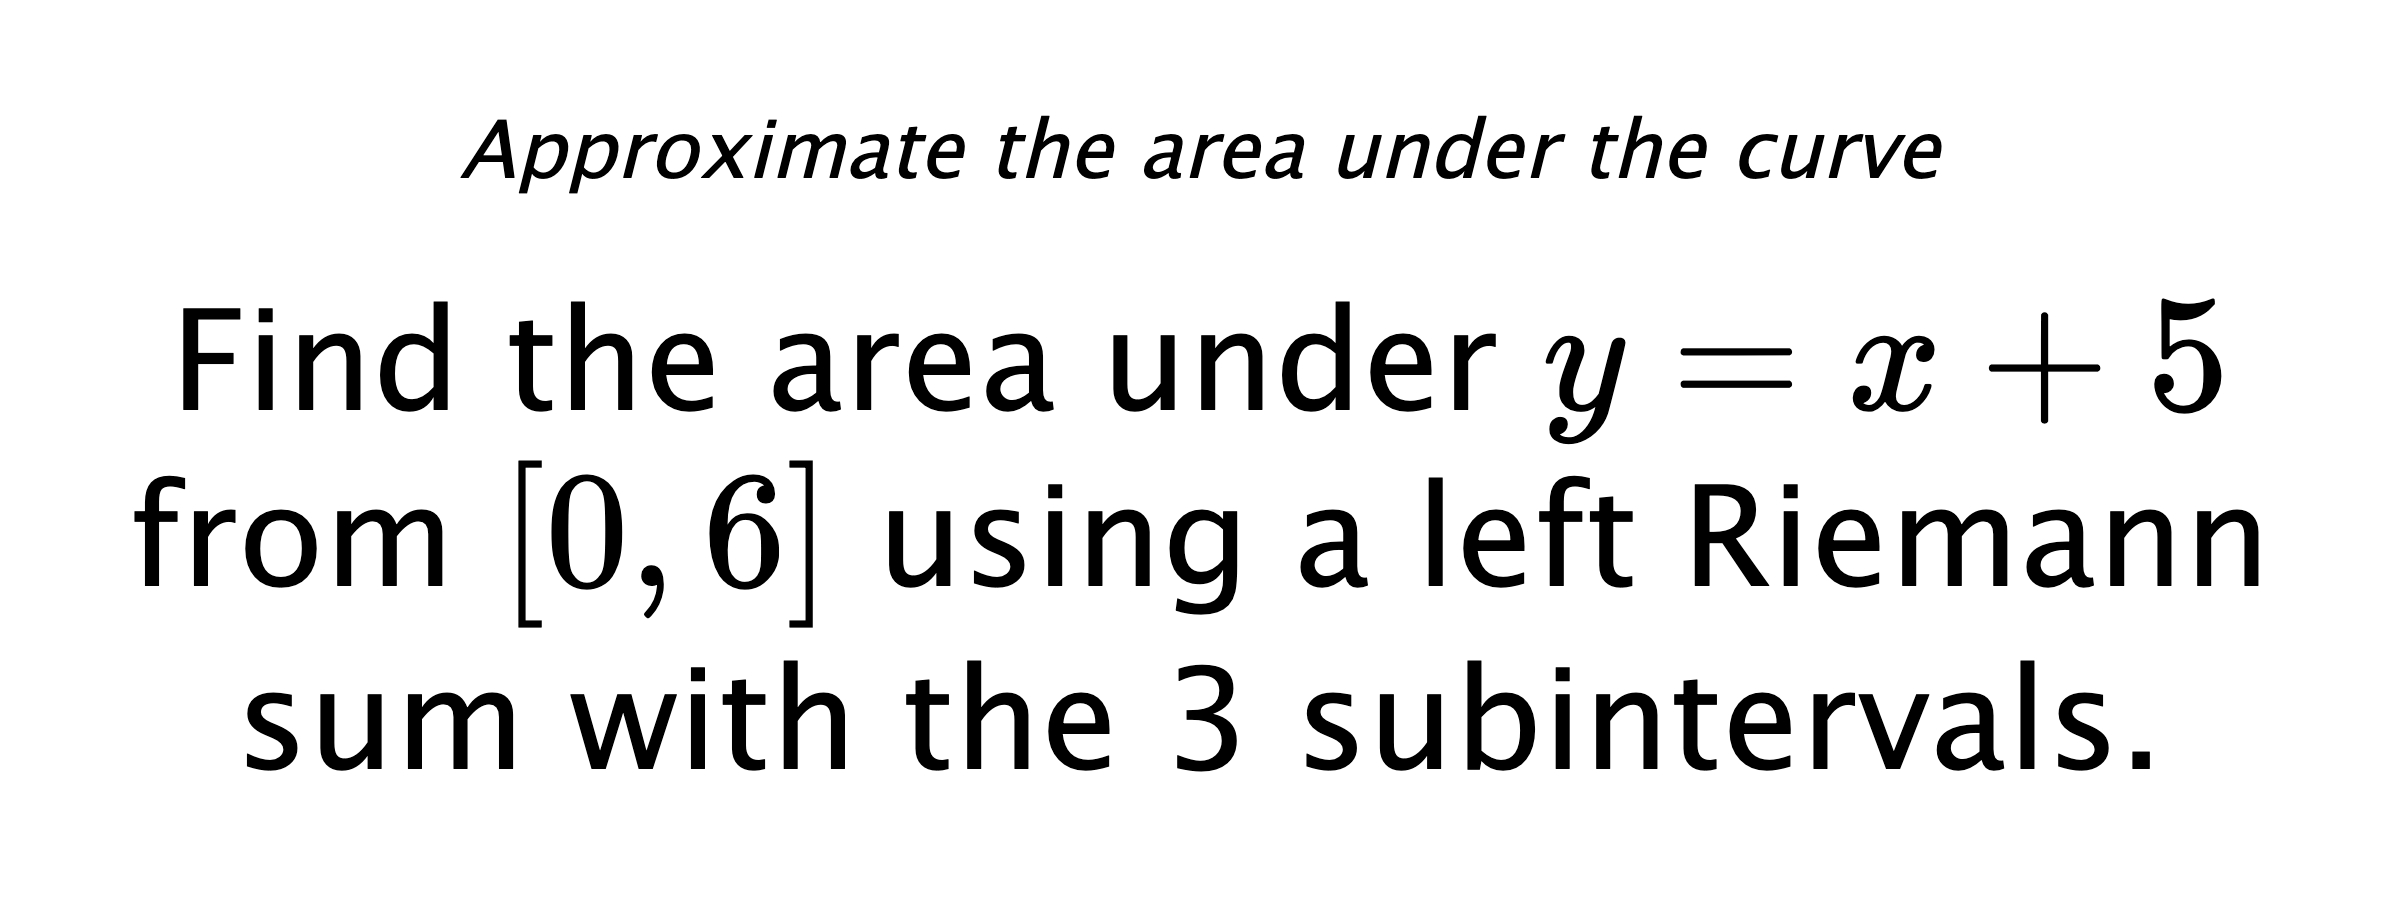 Approximate the area under the curve Find the area under $ y=x+5 $ from $ [0,6] $ using a left Riemann sum with the 3 subintervals.